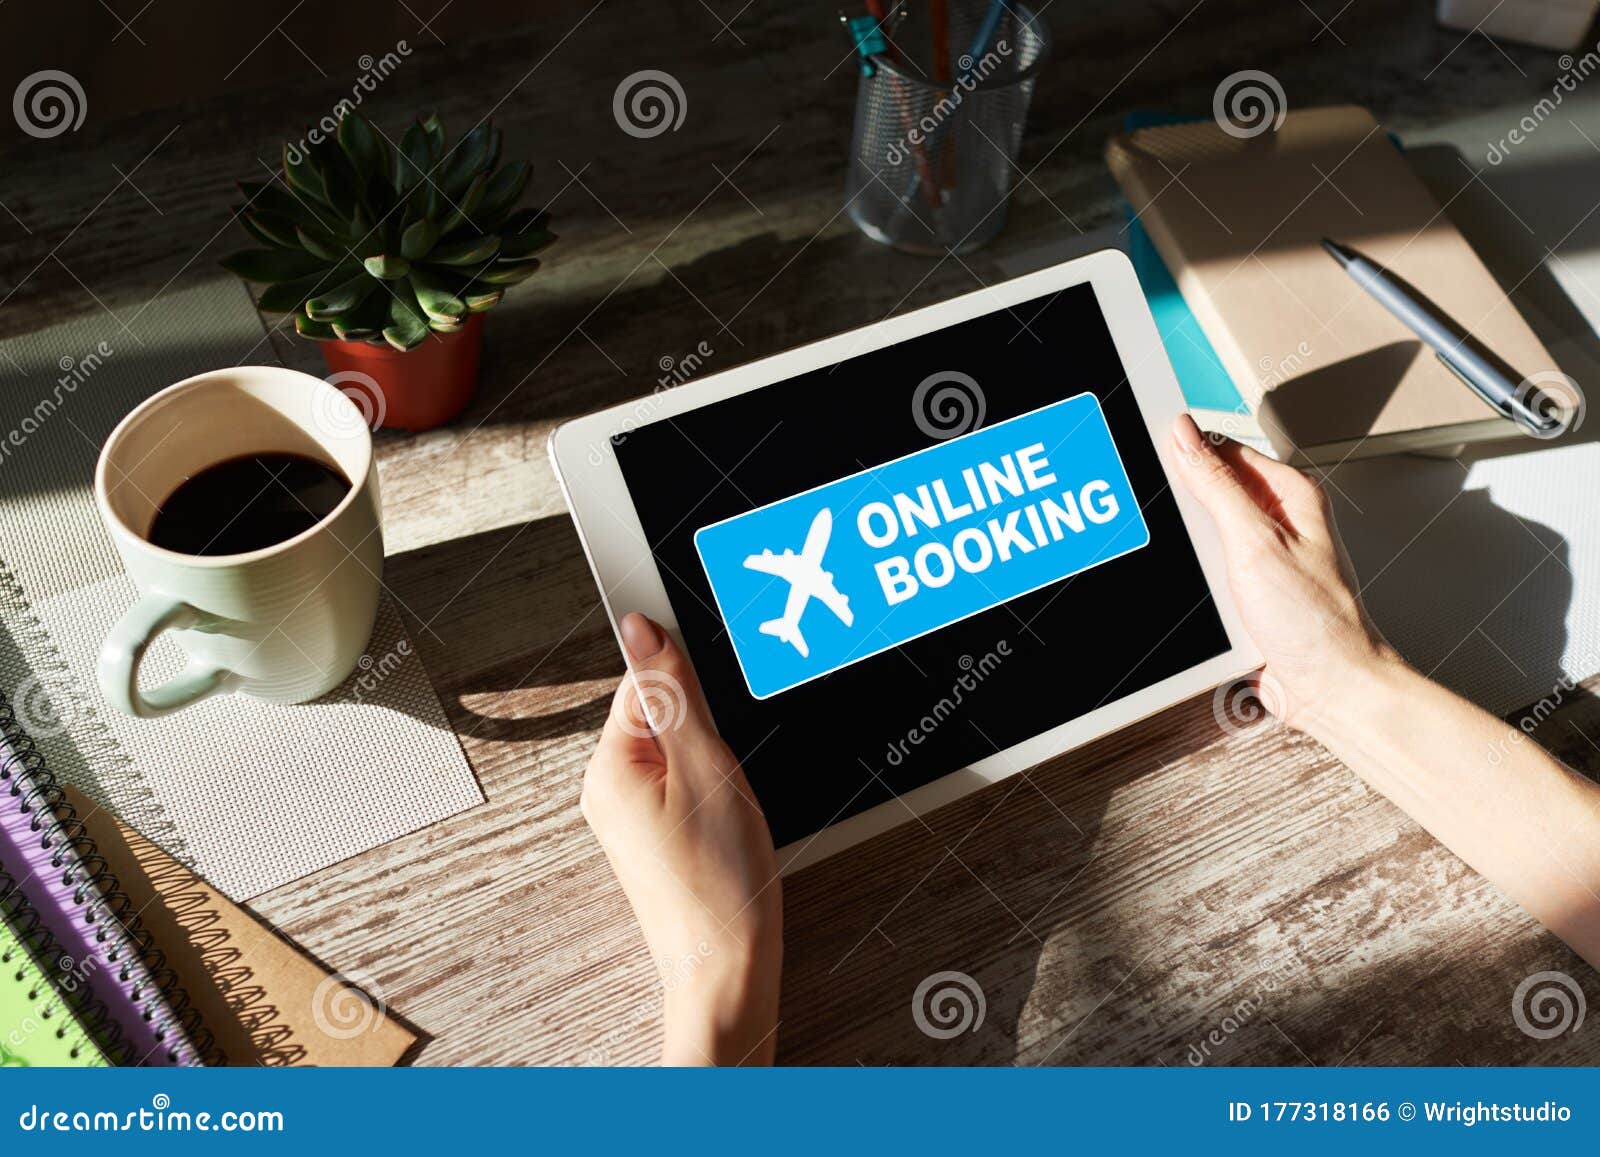 booking flight Boulder City to Moline by phone